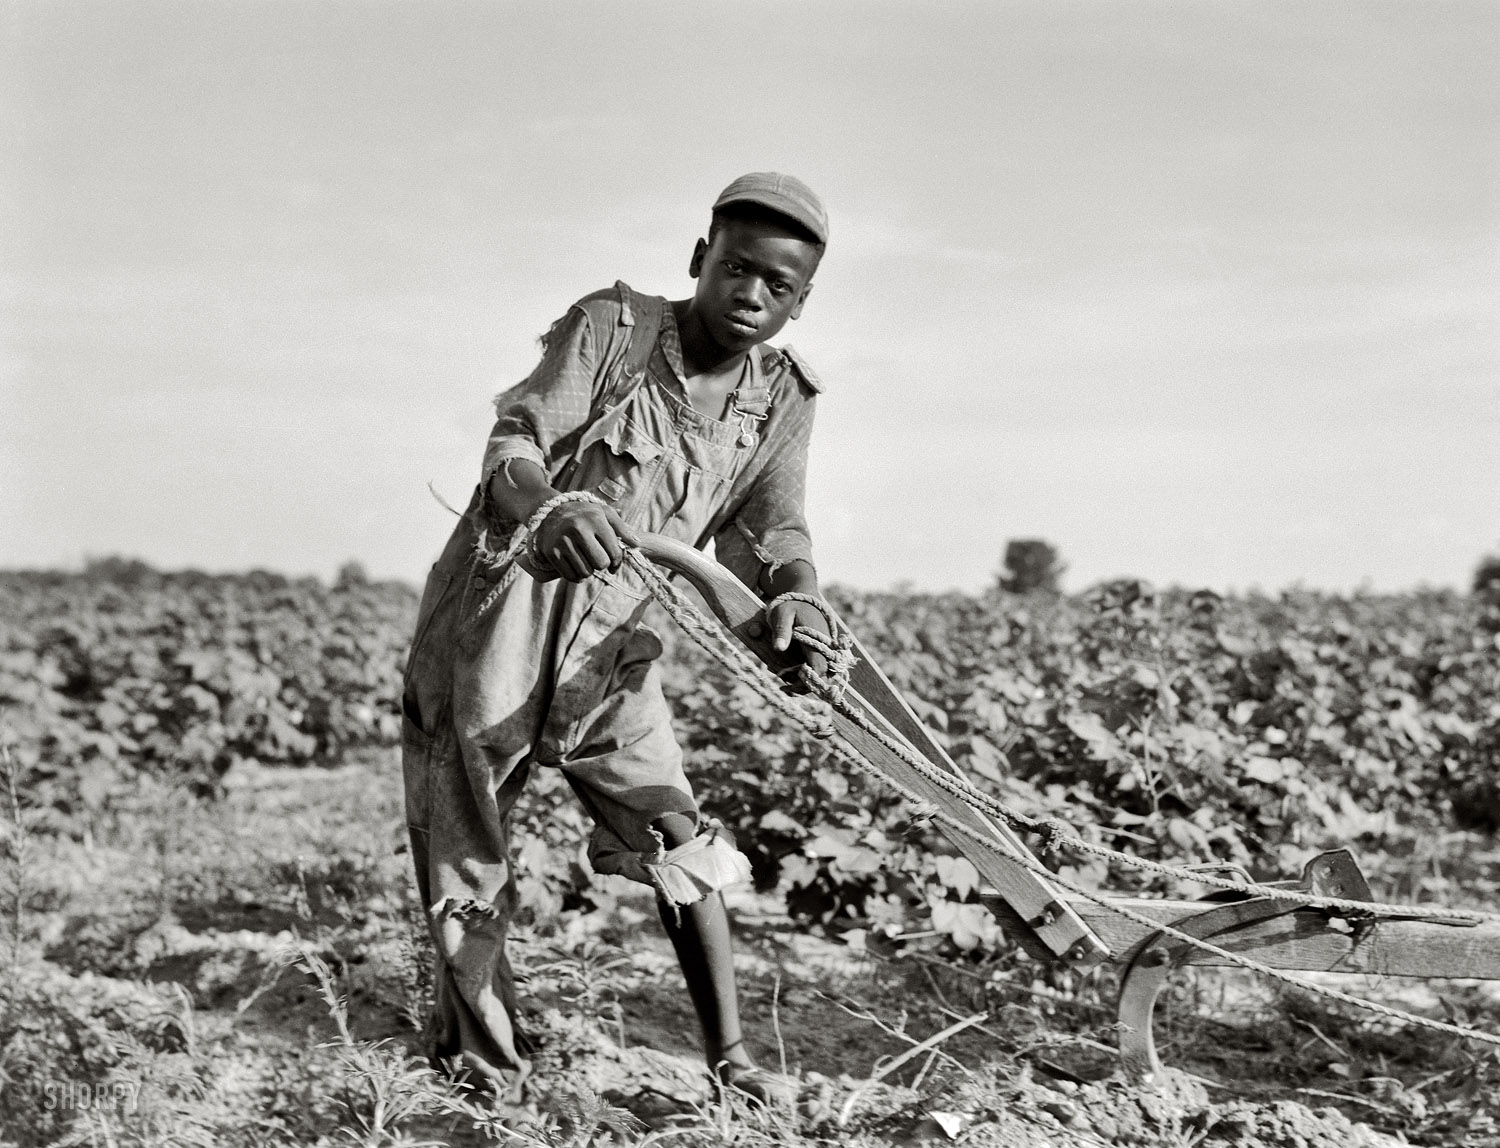 July 1937. "Thirteen-year old sharecropper boy near Americus, Georgia." Medium-format nitrate negative by Dorothea Lange. View full size.  